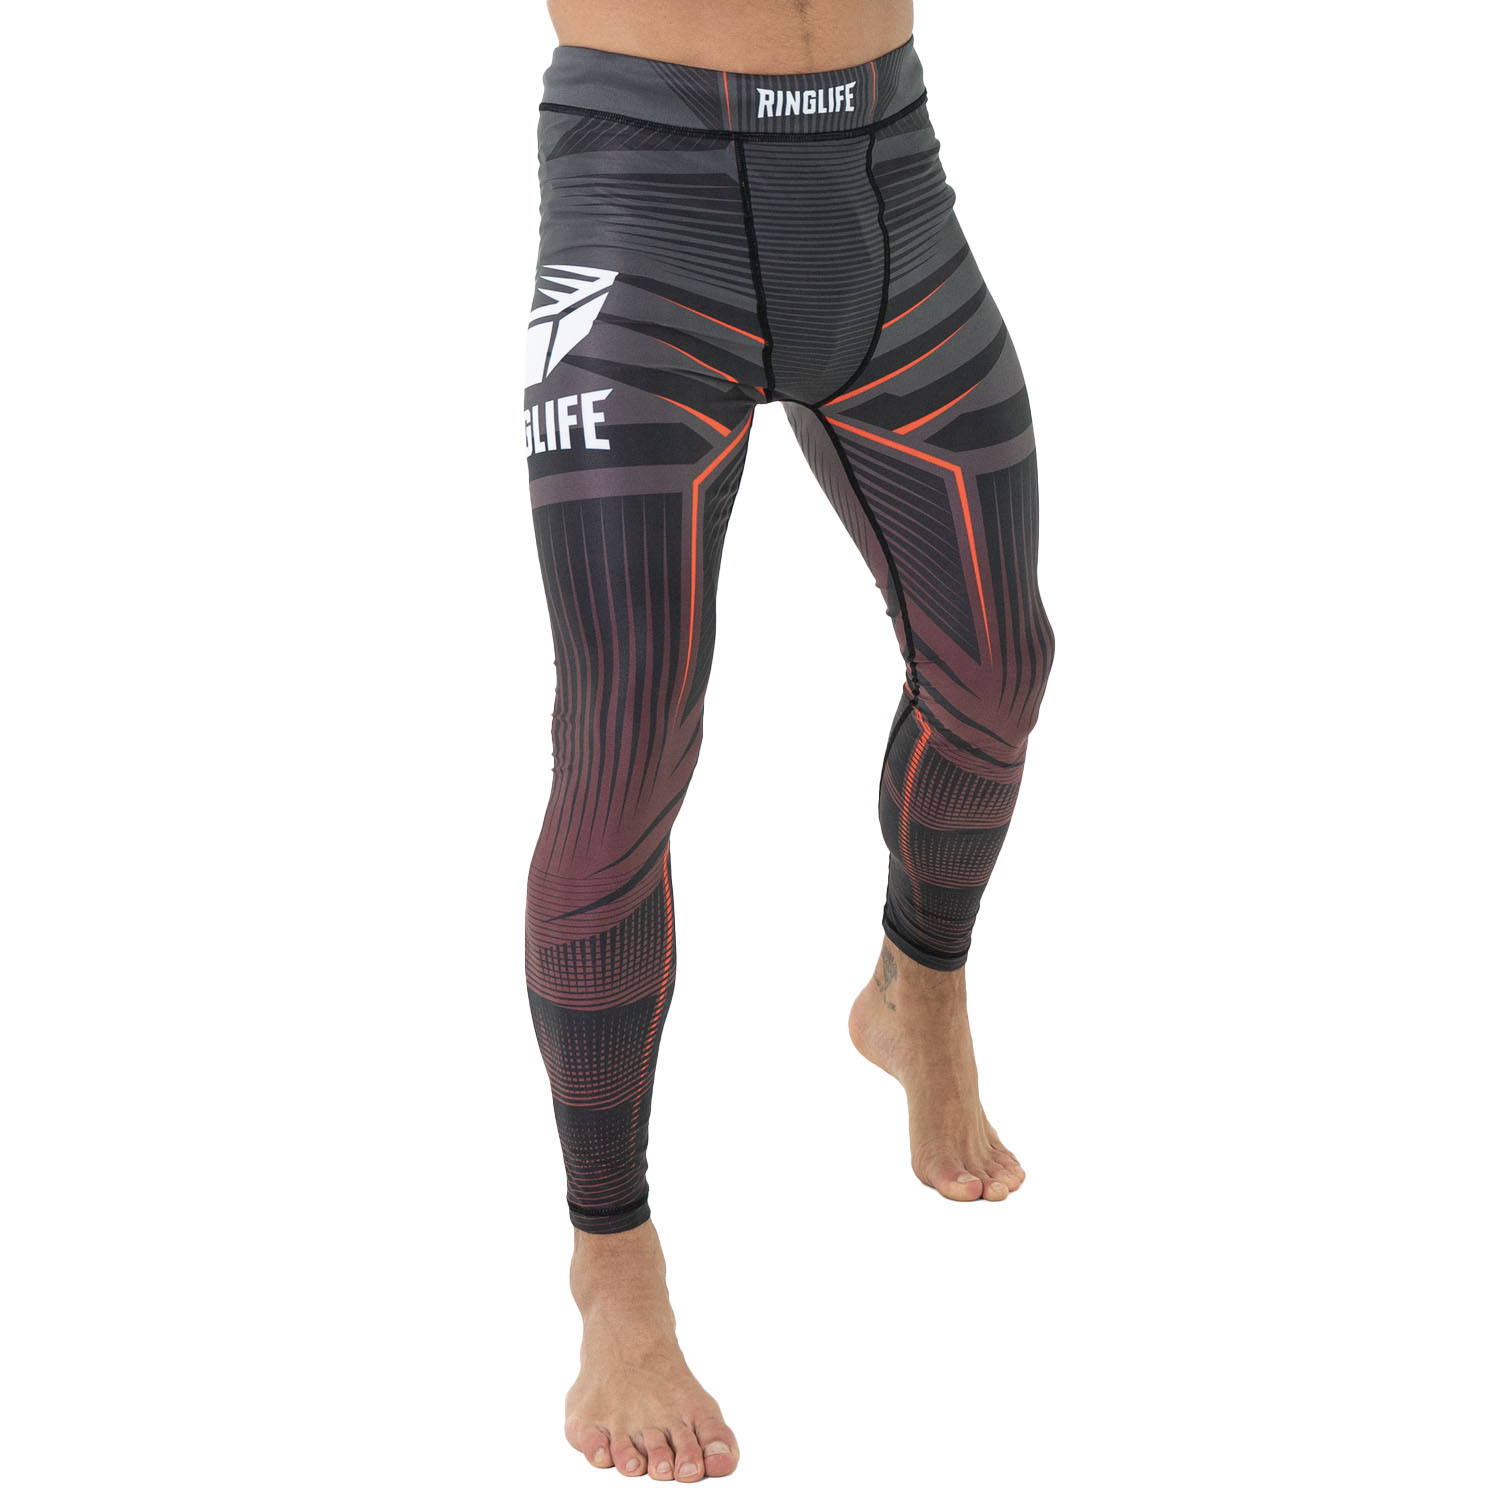 RINGLIFE Compression Pants - Octaring black-red XXL